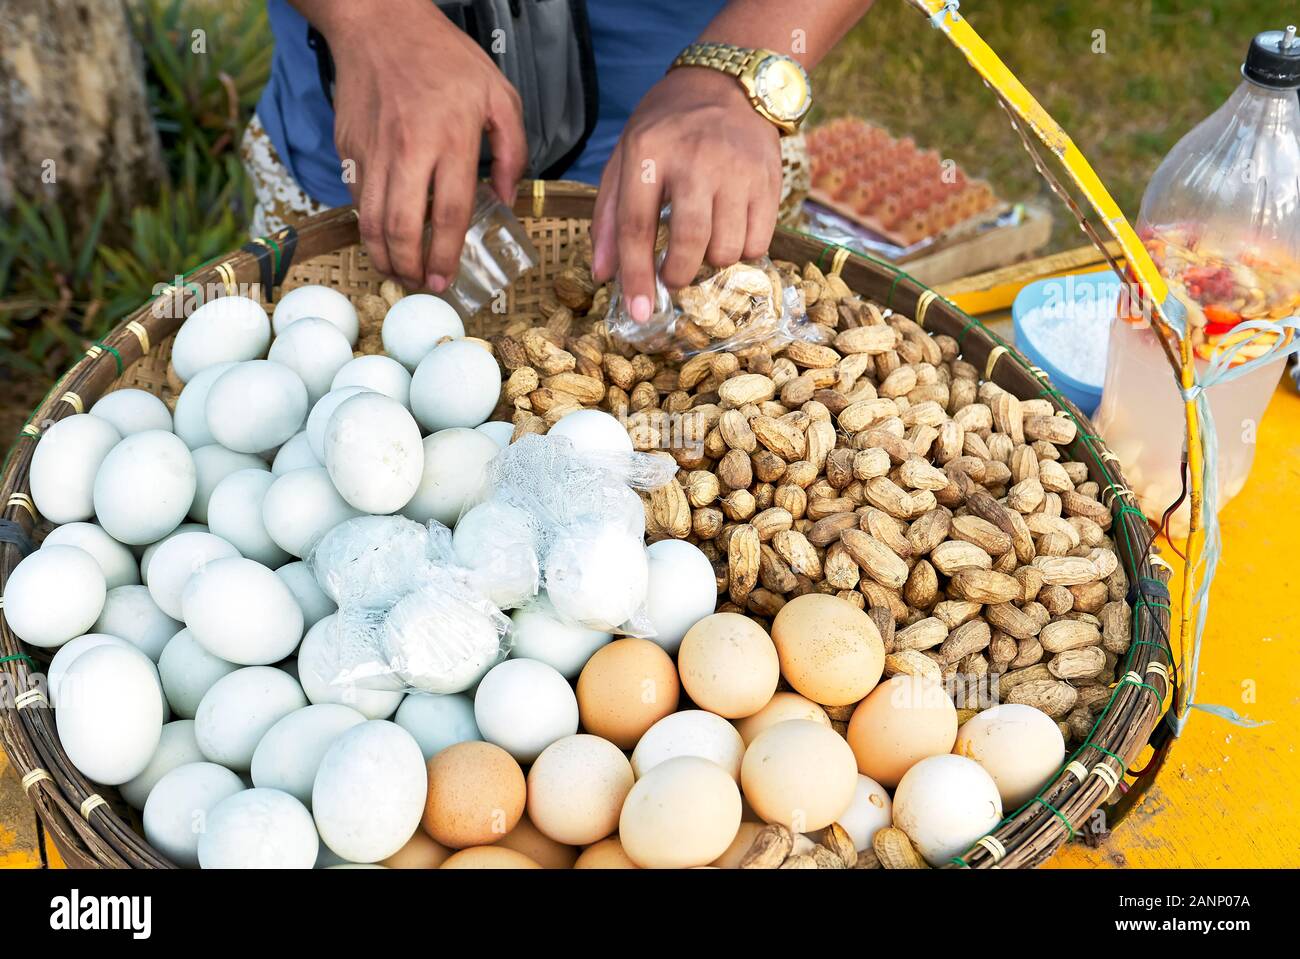 Close-up of steamed peanuts and white and brown boiled eggs, nicely presented in a native bamboo tray, sold by a street vendor in the Philippines Stock Photo